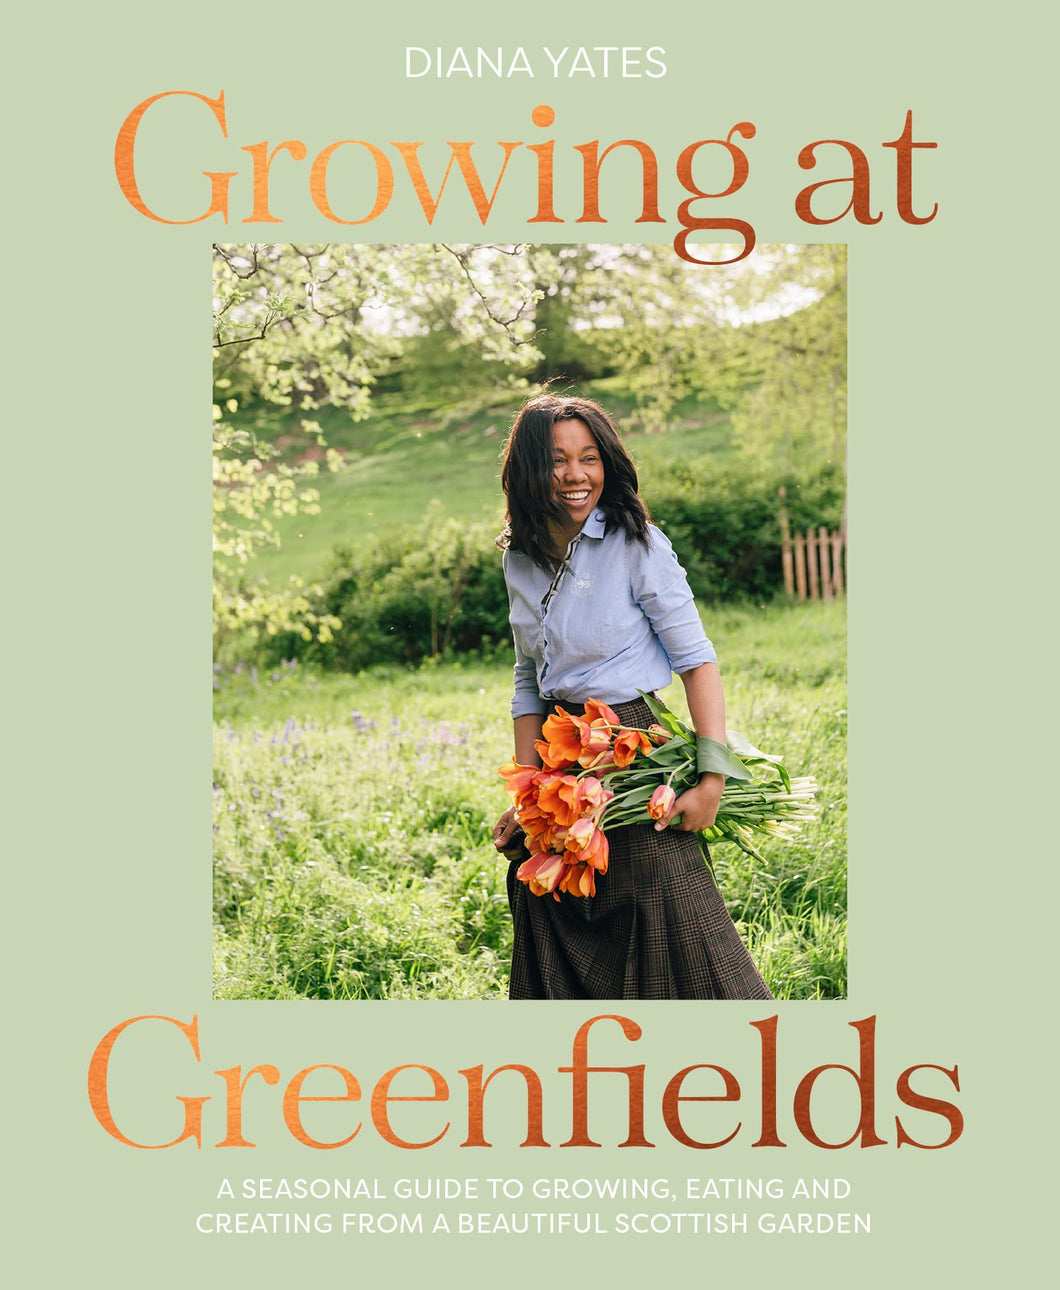 Growing at Greenfields by Diana Yates